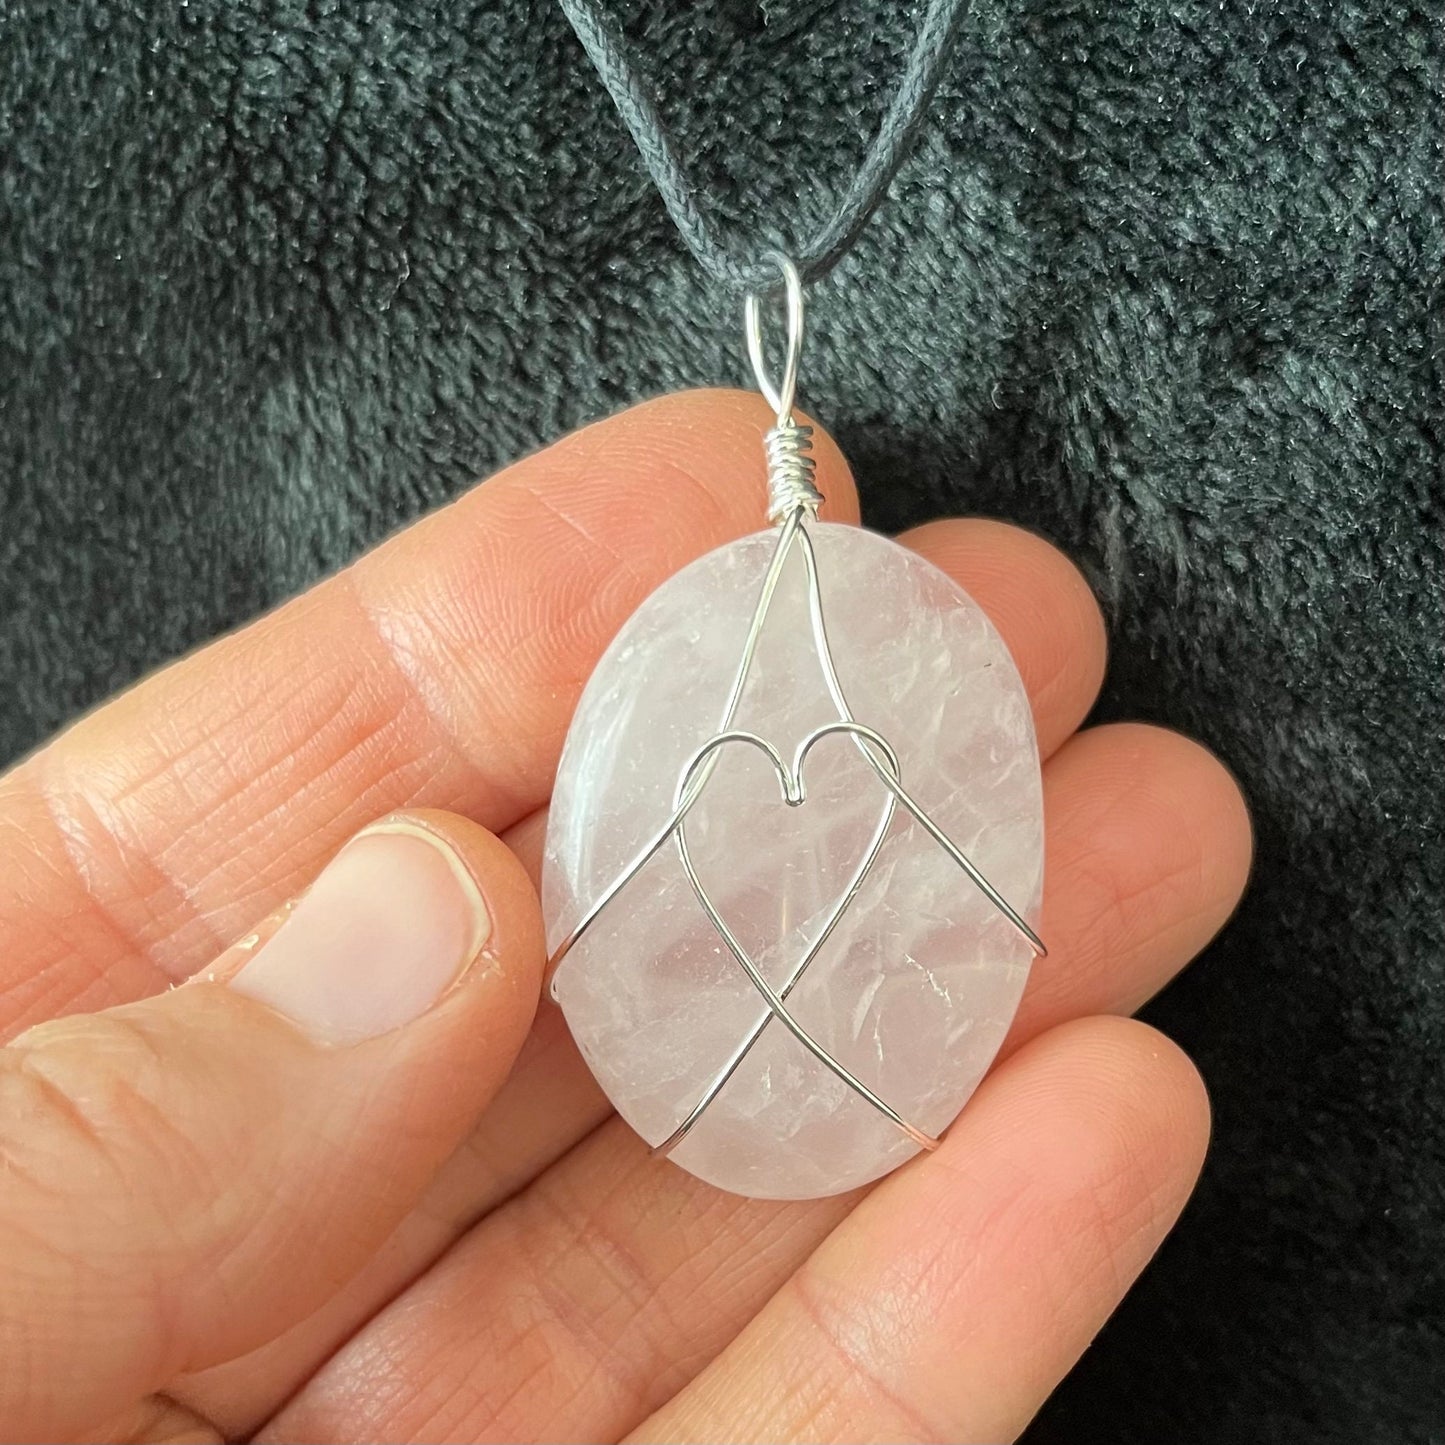 ornately silver wire wrapped translicent pink rose quartz worry stone pendant, approximately 1 1/4" long, attarched to an adjustable black cord.   The ailver wire male a heart shape in the center pf the rose quartz stone.